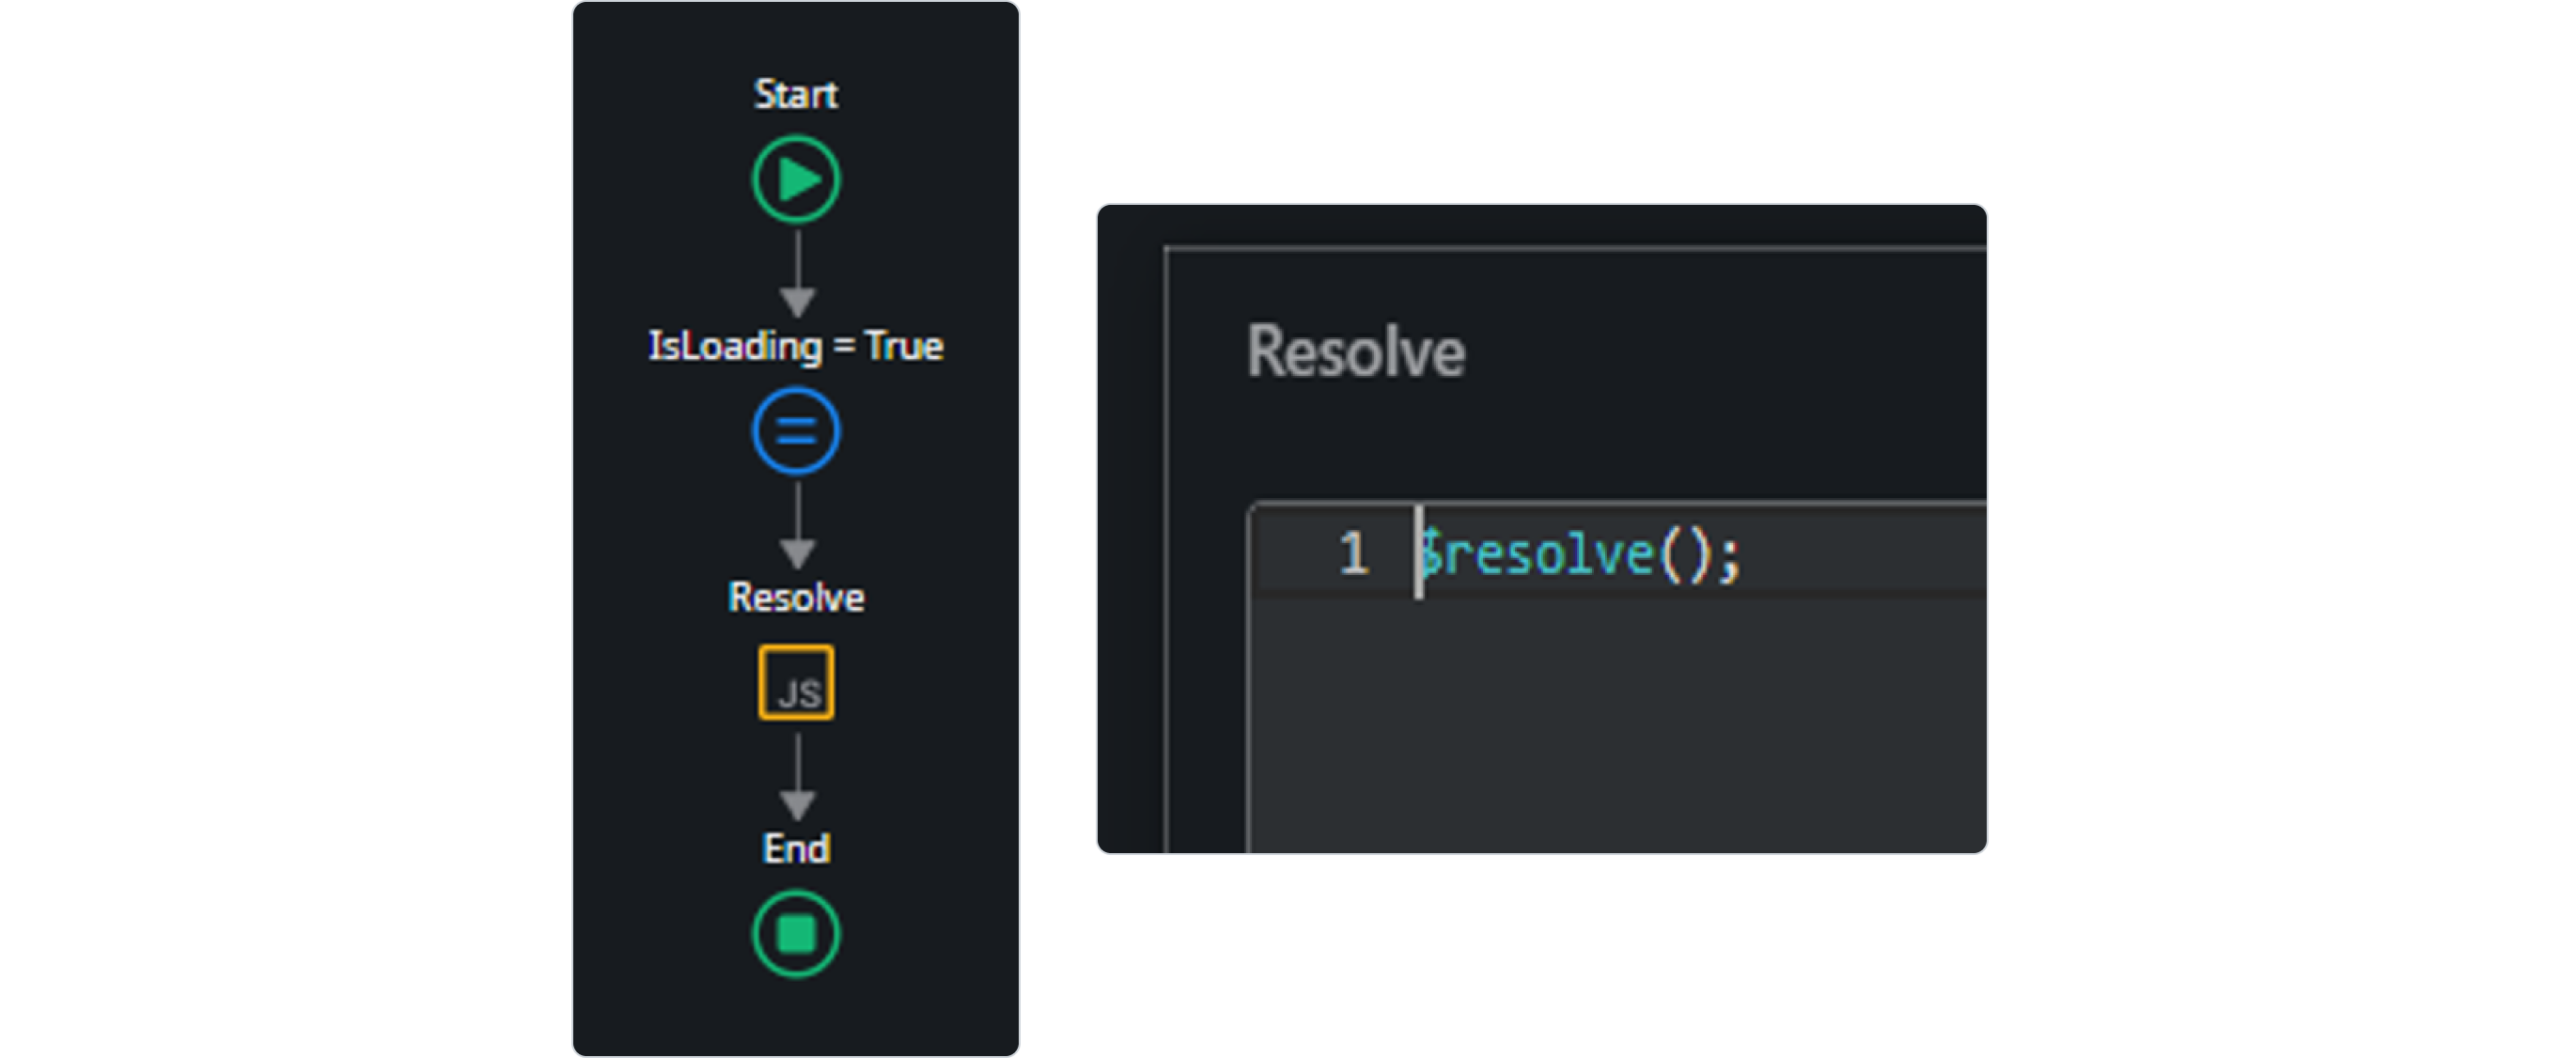 A screenshot of a process flow in Service Studio and a second screenshot to its right withe code “1 $resolve();“